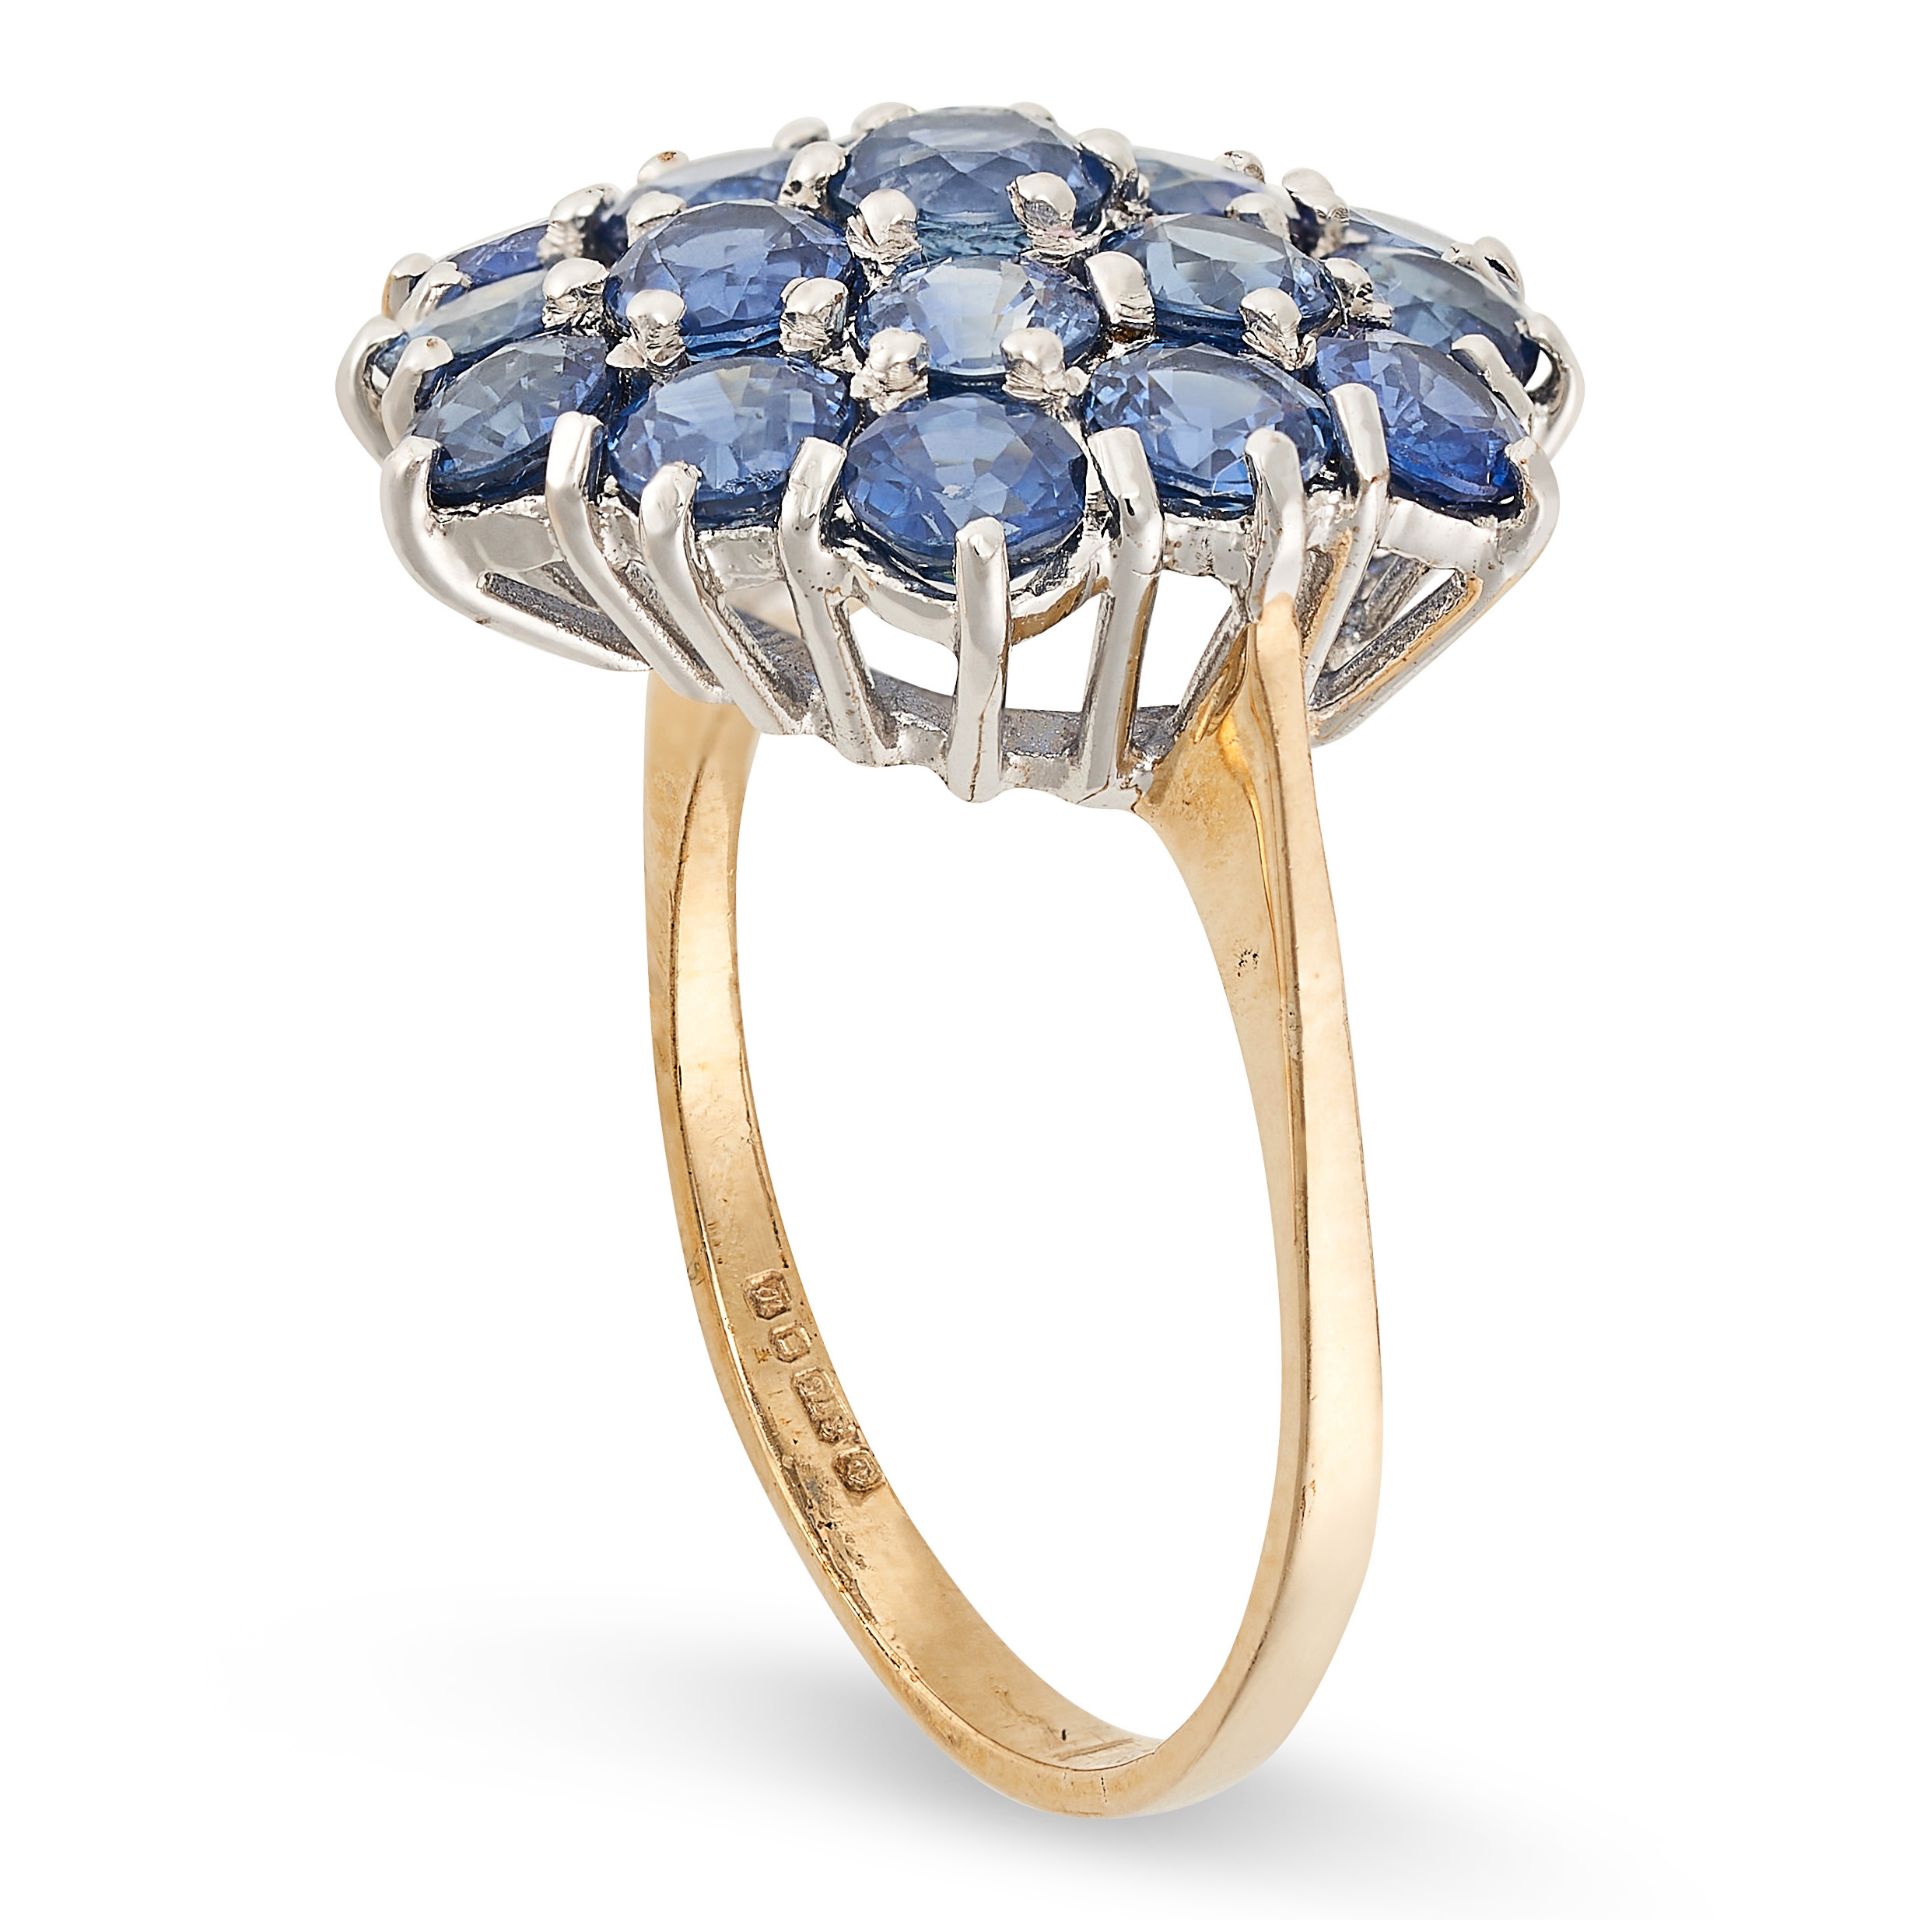 A SAPPHIRE CLUSTER RING in 9ct yellow gold, set with a cluster of round cut sapphires, British - Image 2 of 2